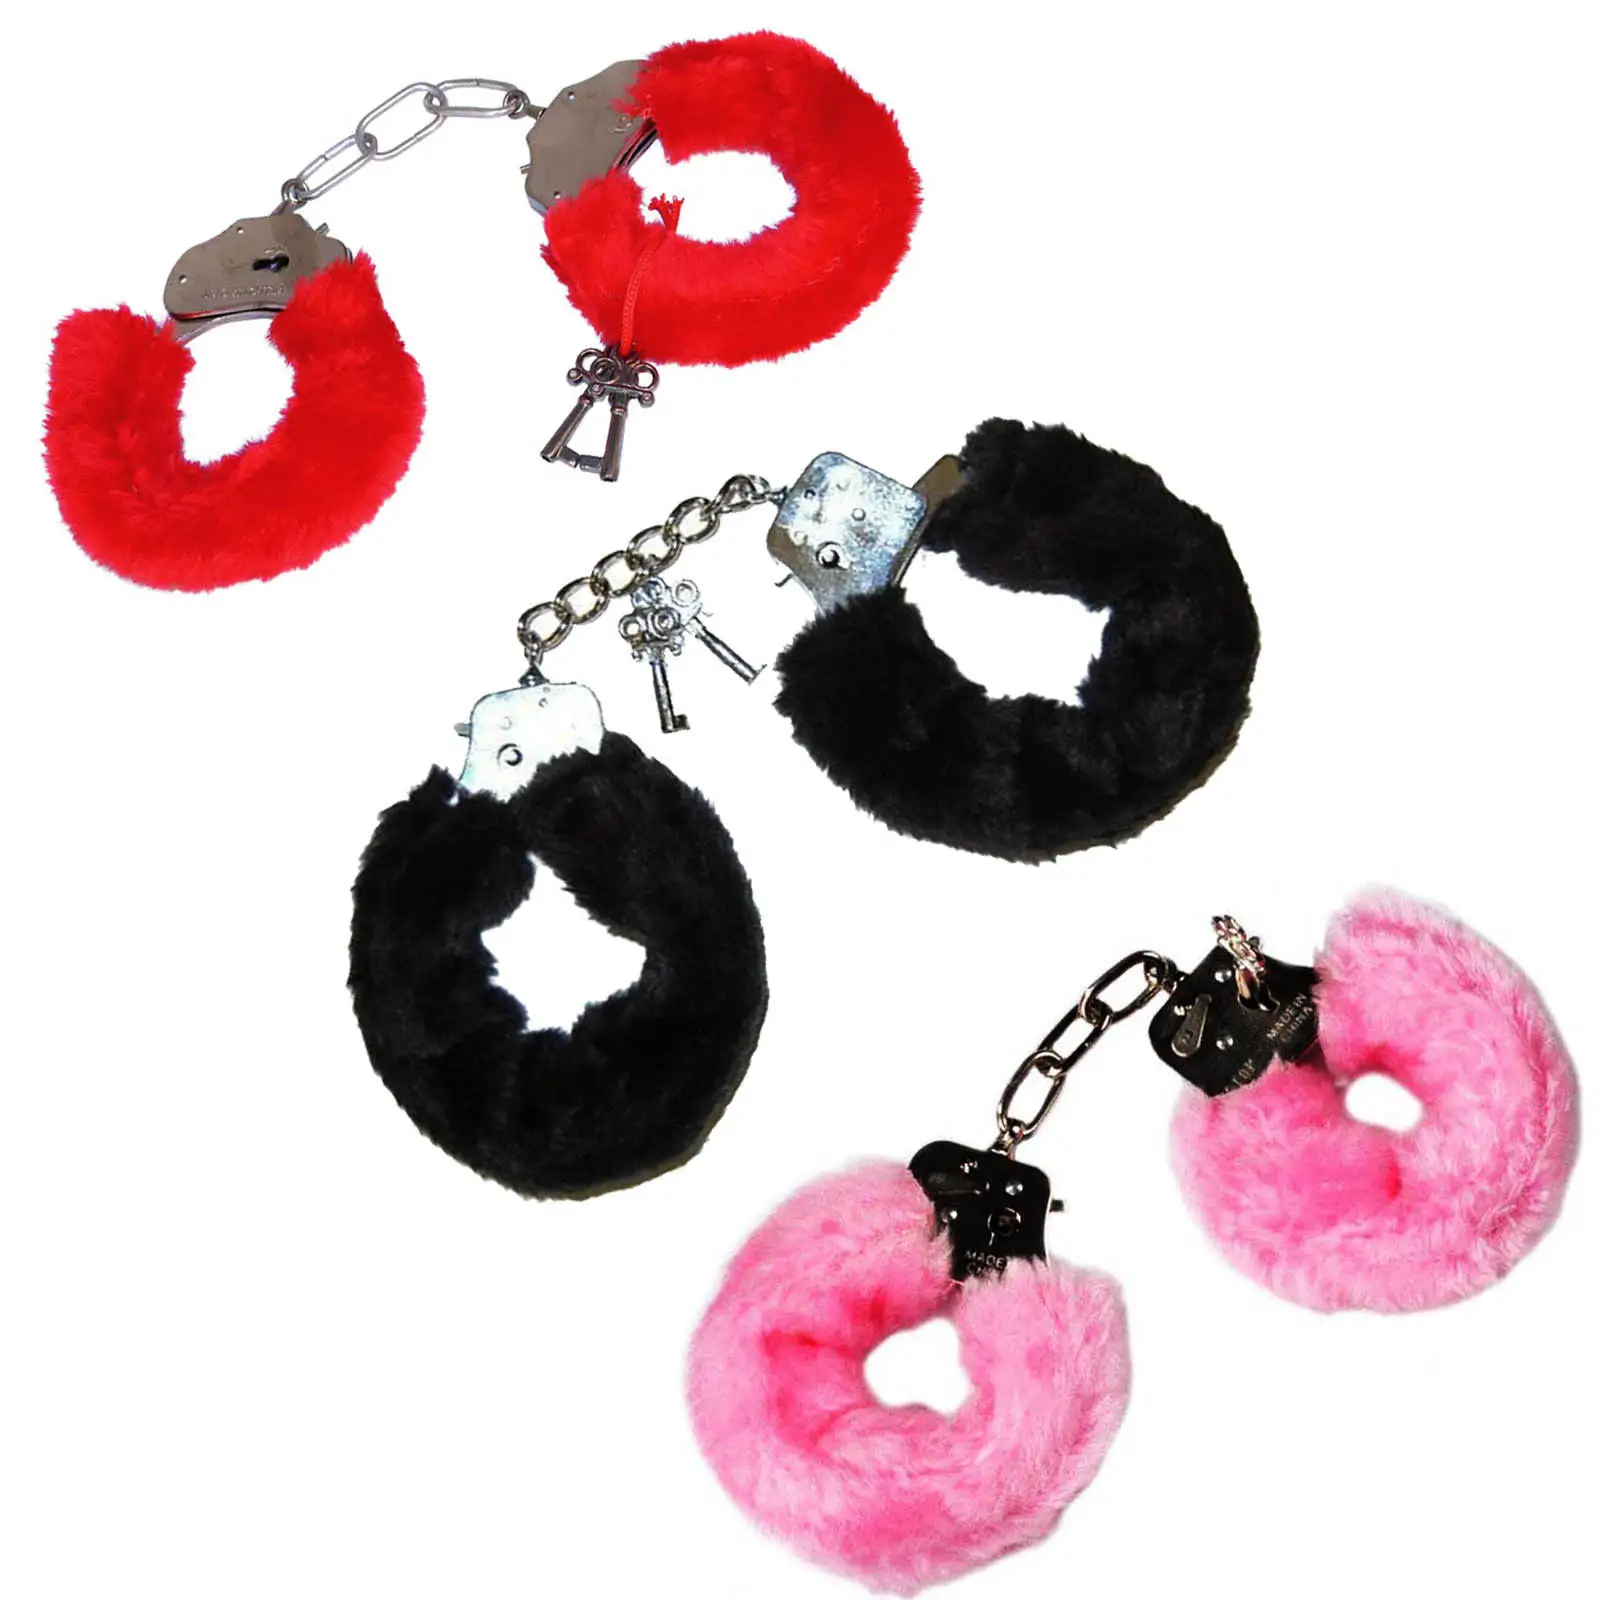 Furry Fluffy Handcuffs Red Black Pink Fancy Dress Hen Night Play Toy SF1317